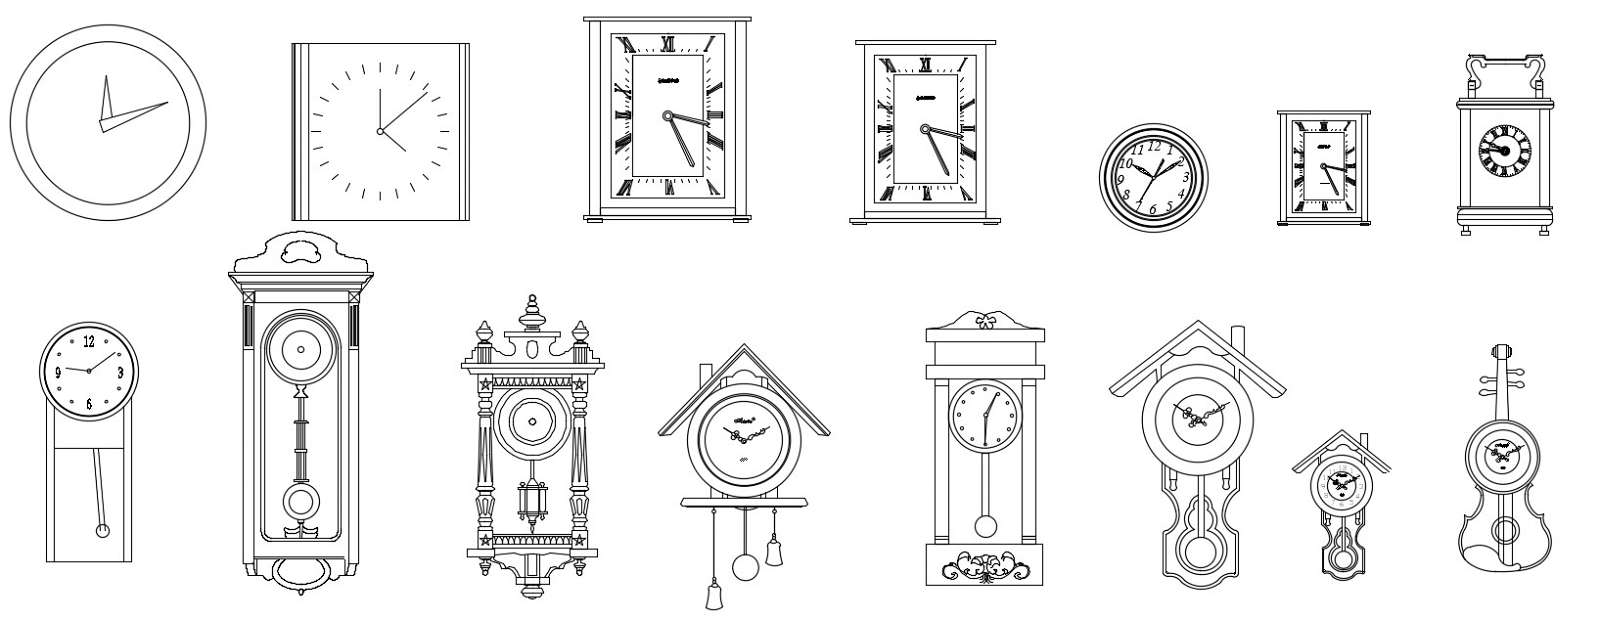 Pocket watch Clock Design, pocket watch tattoo drawings, ink, monochrome  png | PNGEgg